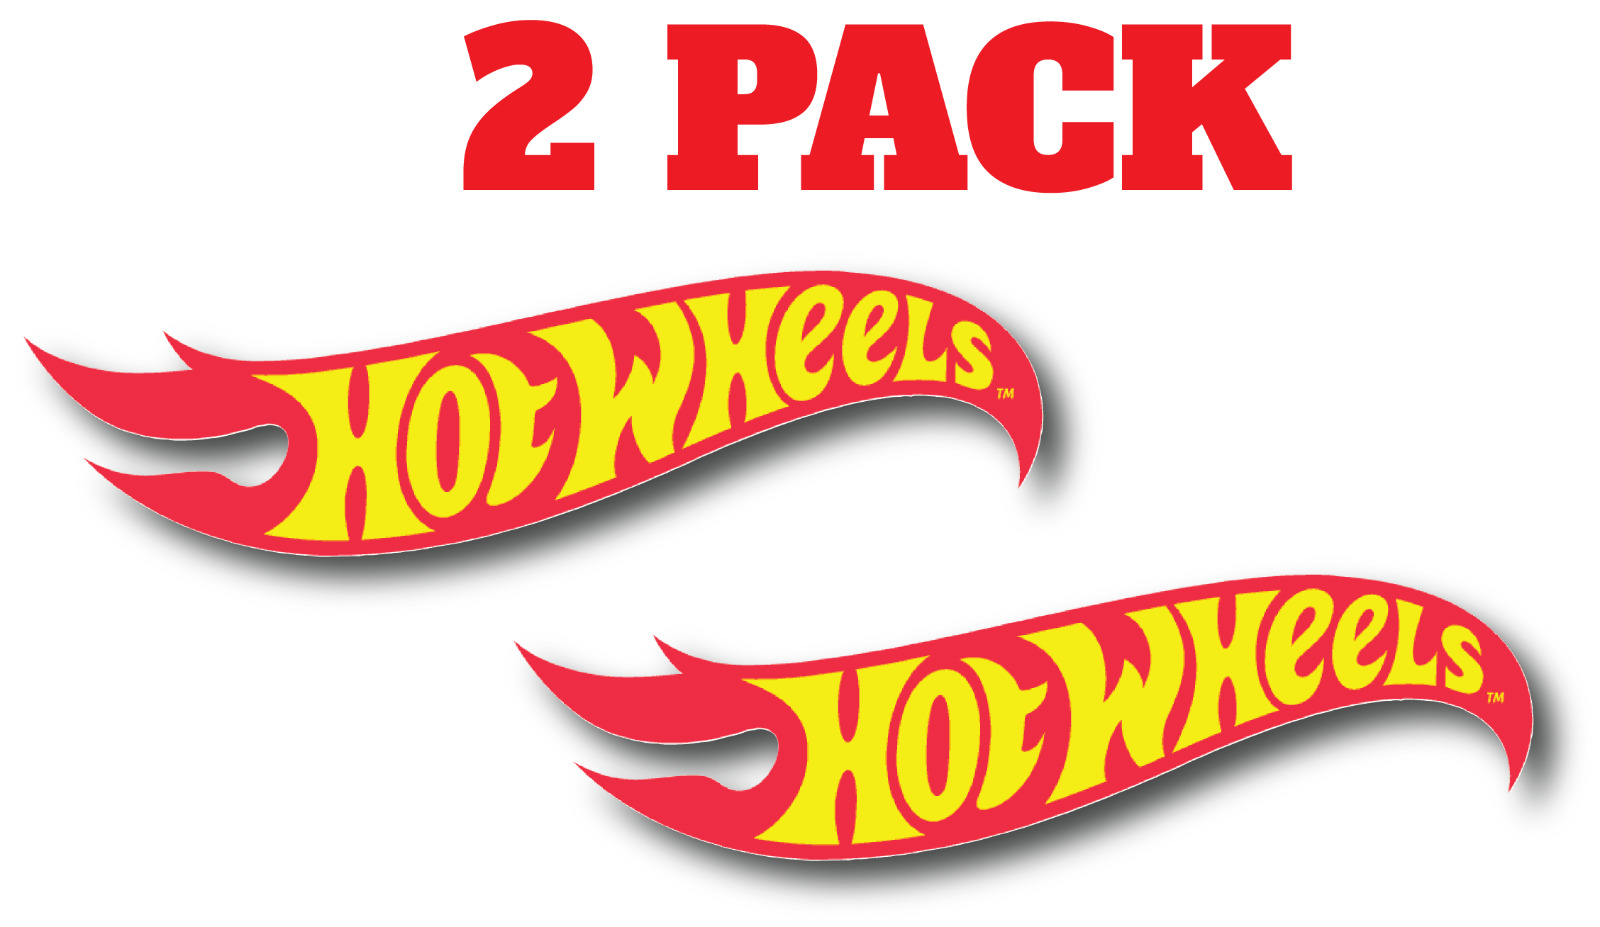 Hot Wheels sticker decal Decal Vinyl Sticker 2 PACK MULTI SIZE RACING TOOL BOX